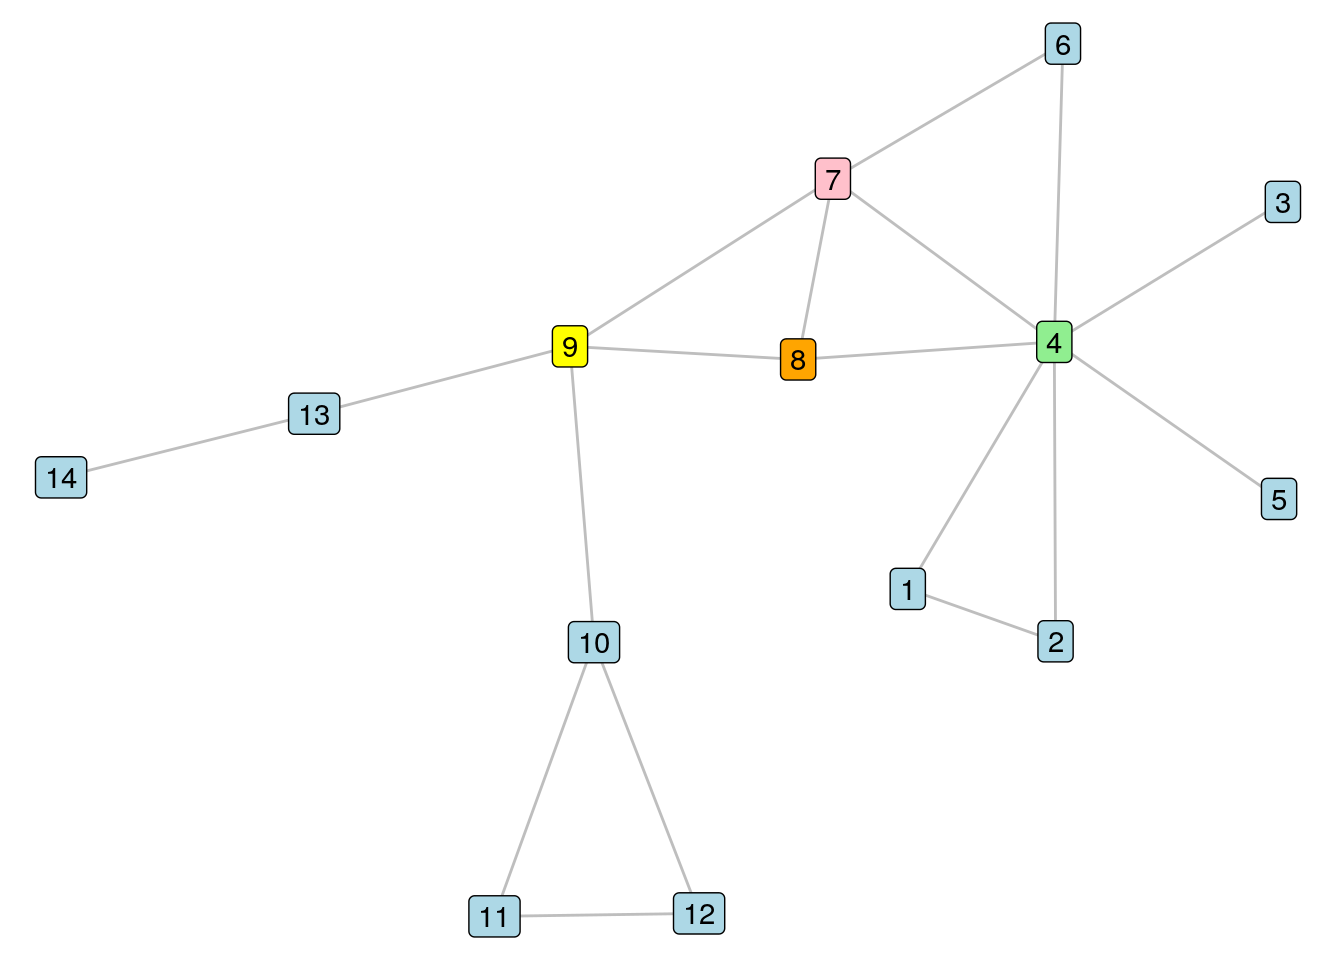 The $G_{14}$ graph with four vertices of interest colored differently